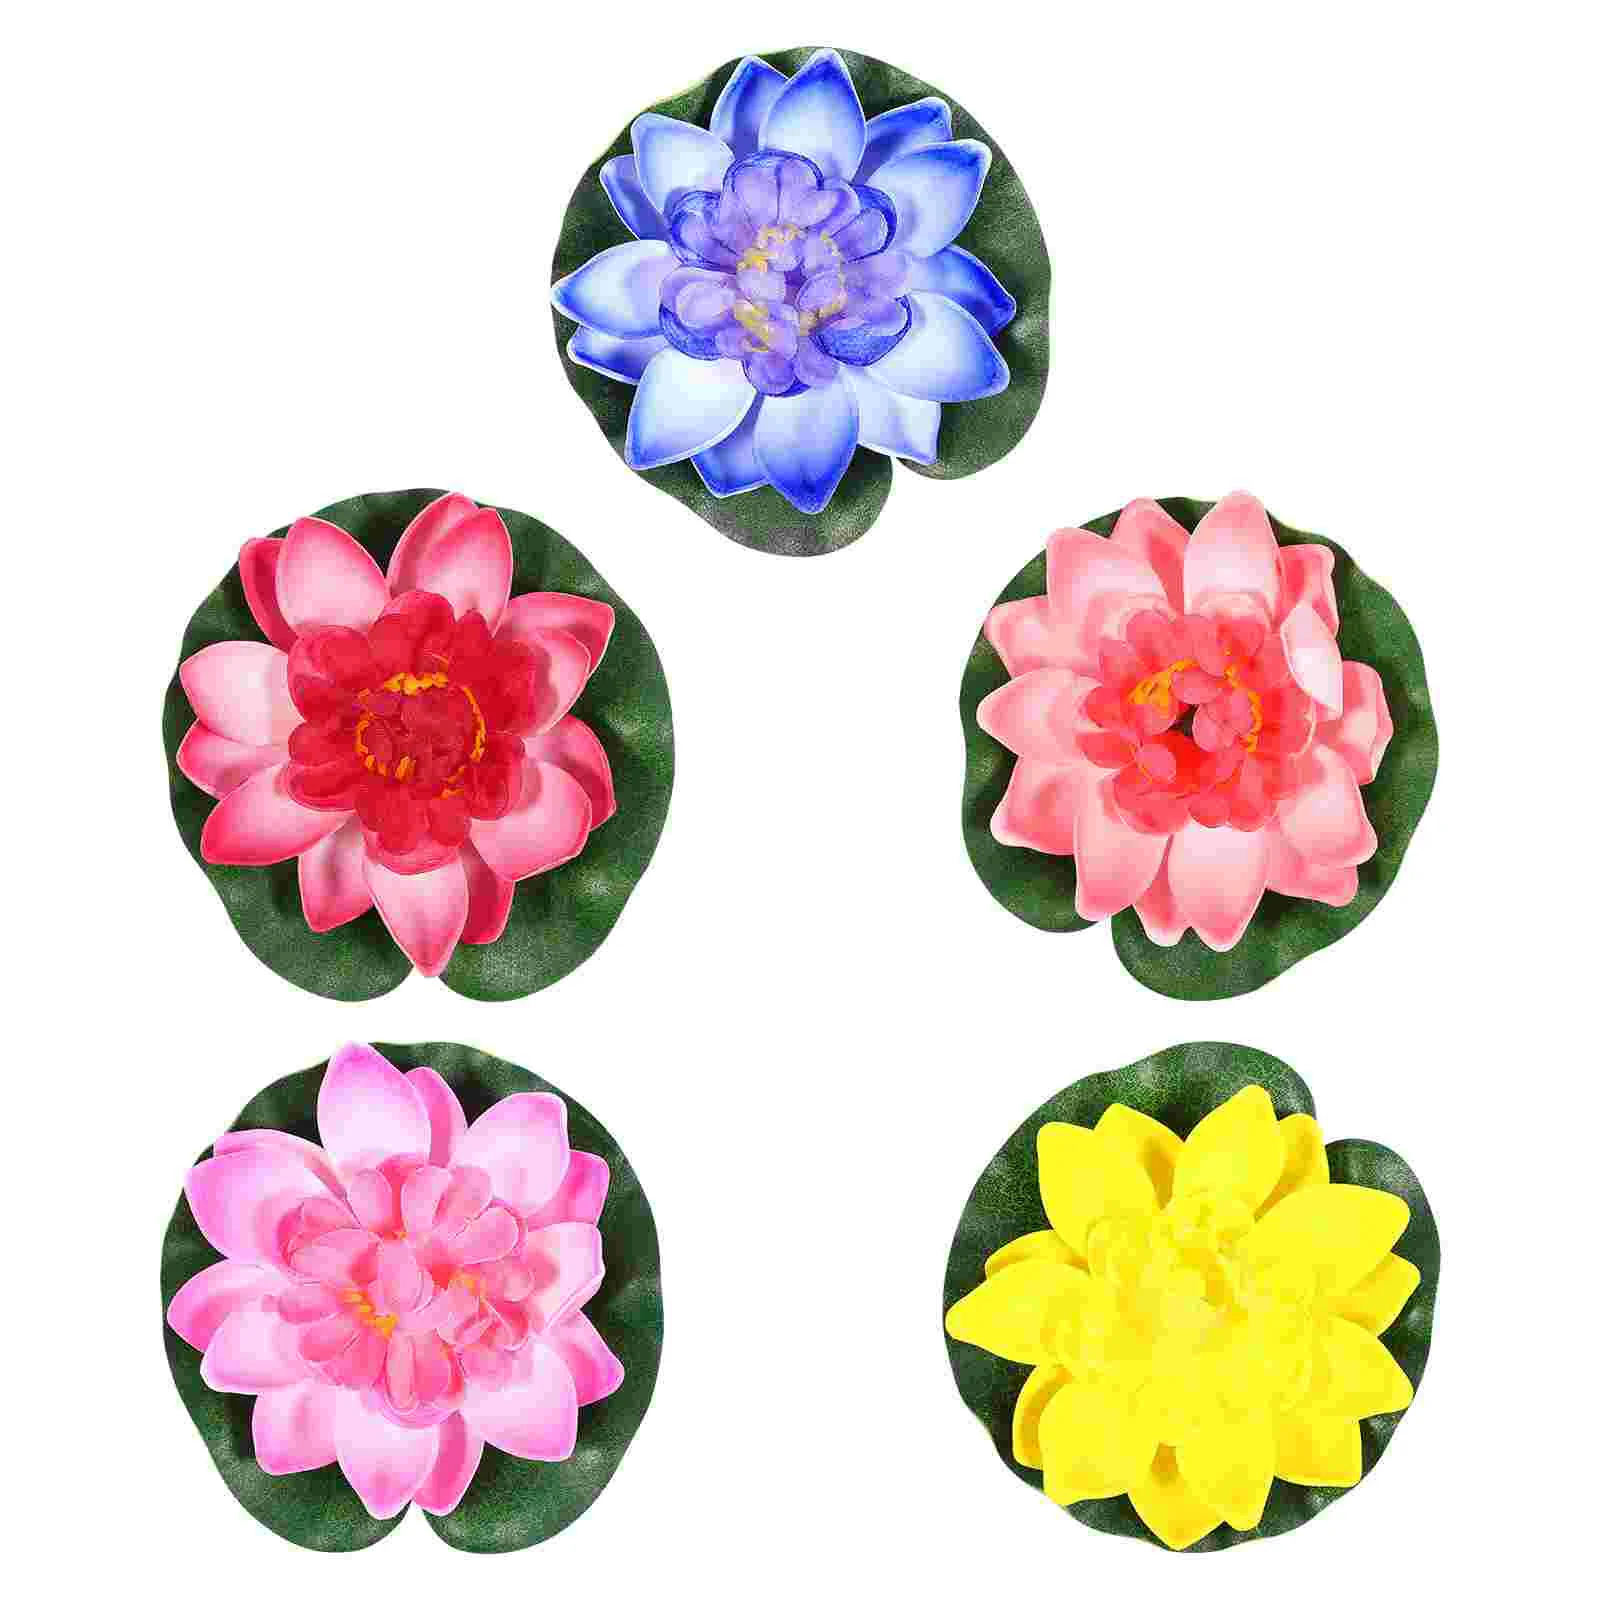 

Lotus Lily Floating Flower Pond Water Decor Artificial Pads Flowers Simulated Lilly Outdoor Decorationspara Decoracion